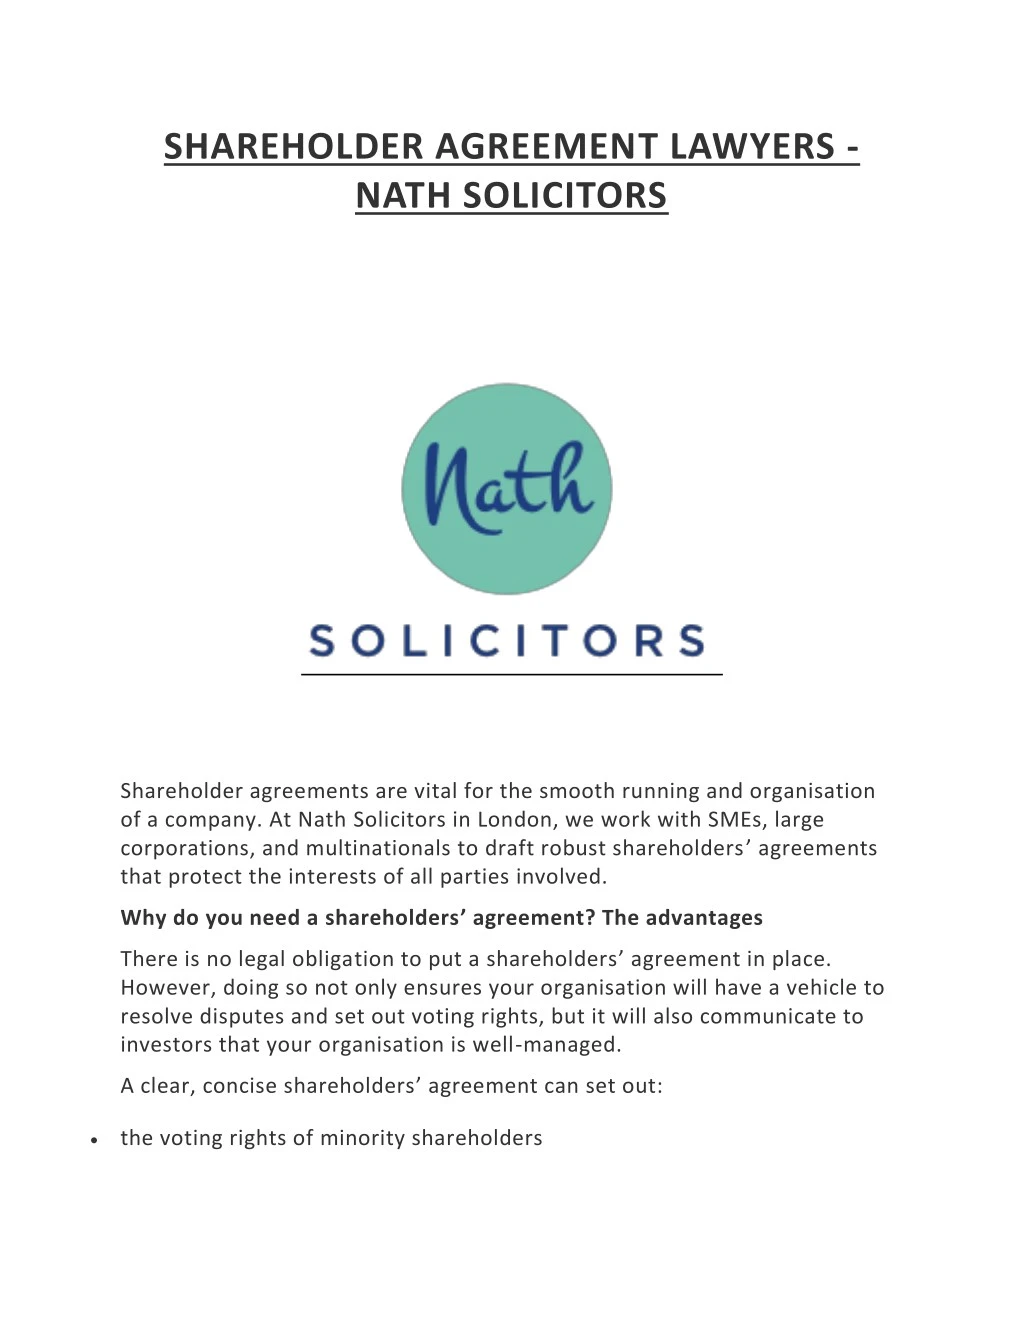 shareholder agreement lawyers nath solicitors